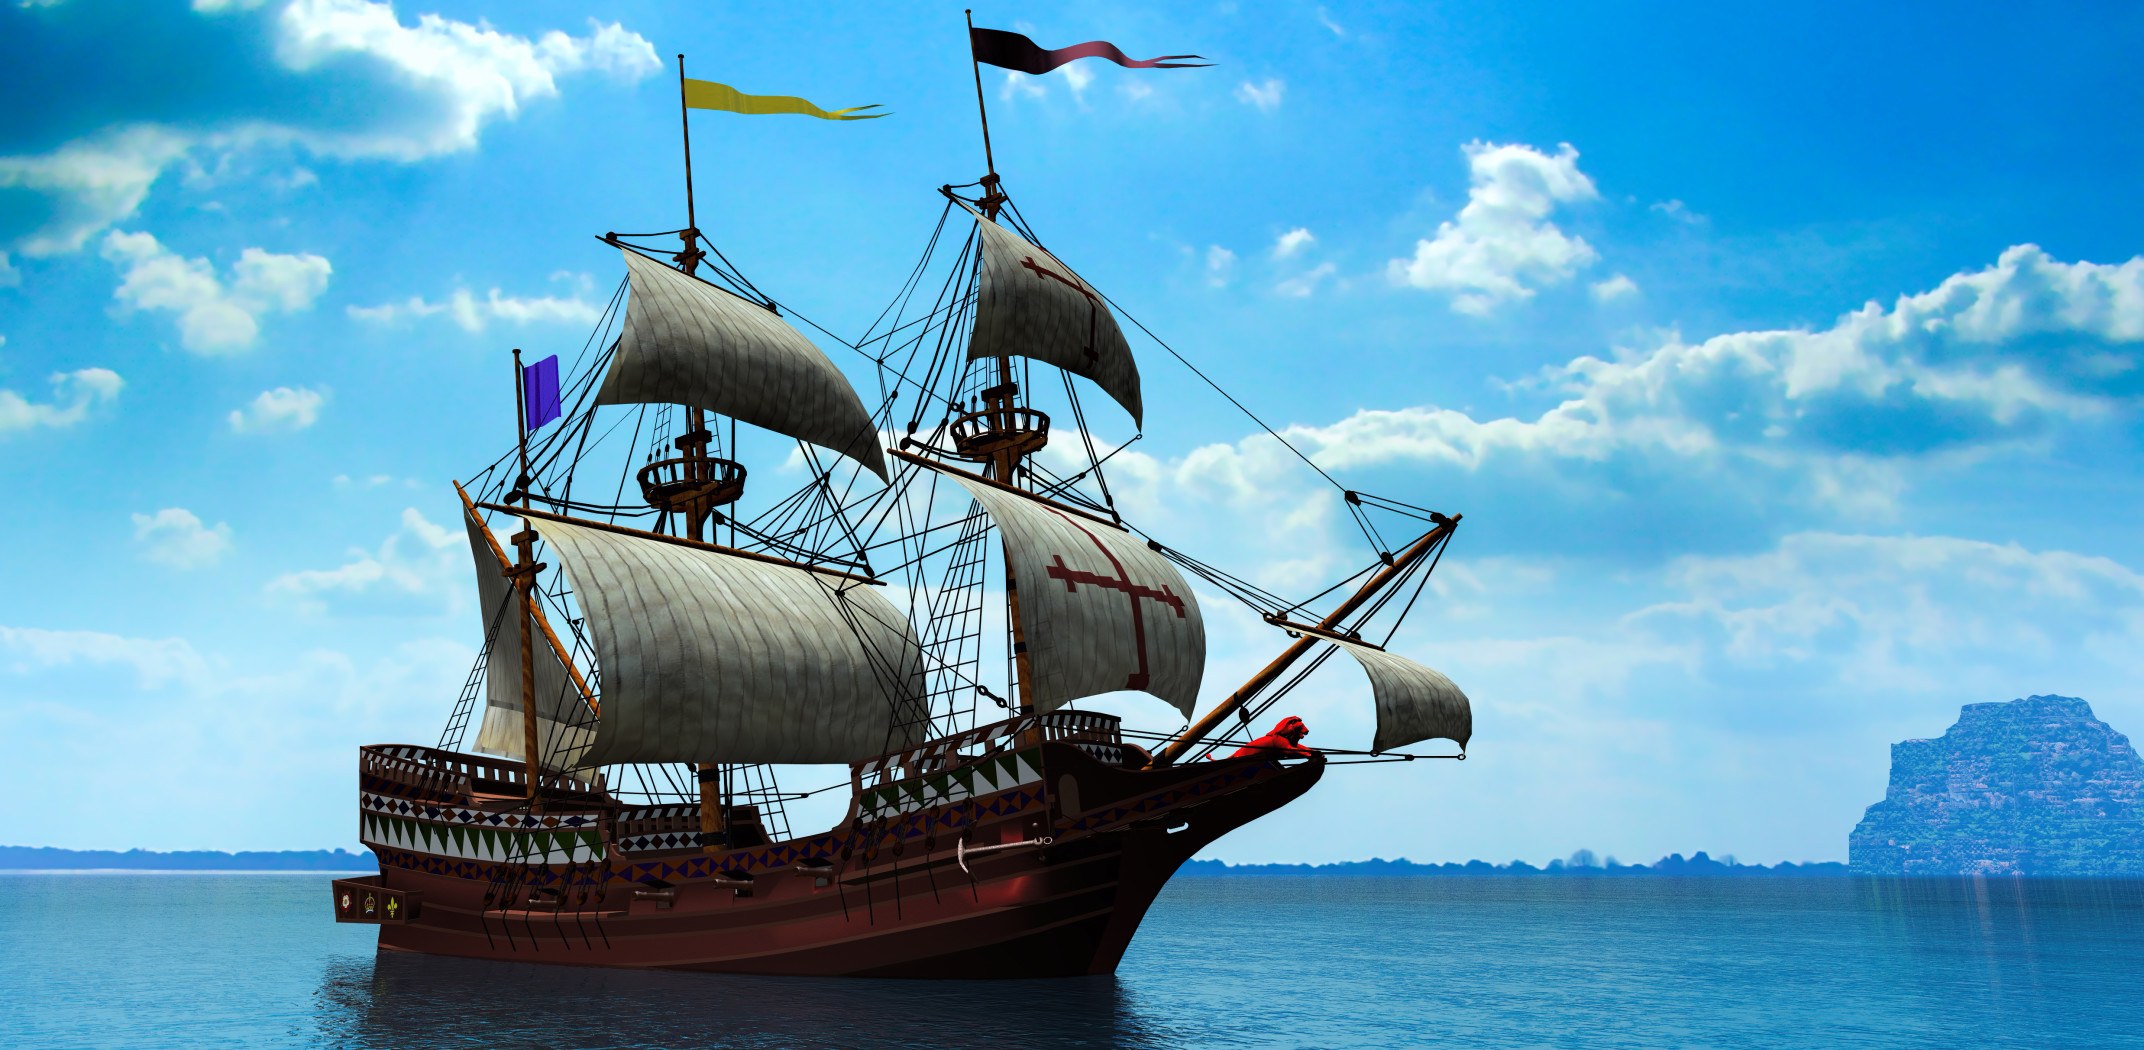 Spanish galleon on calm and blue sea